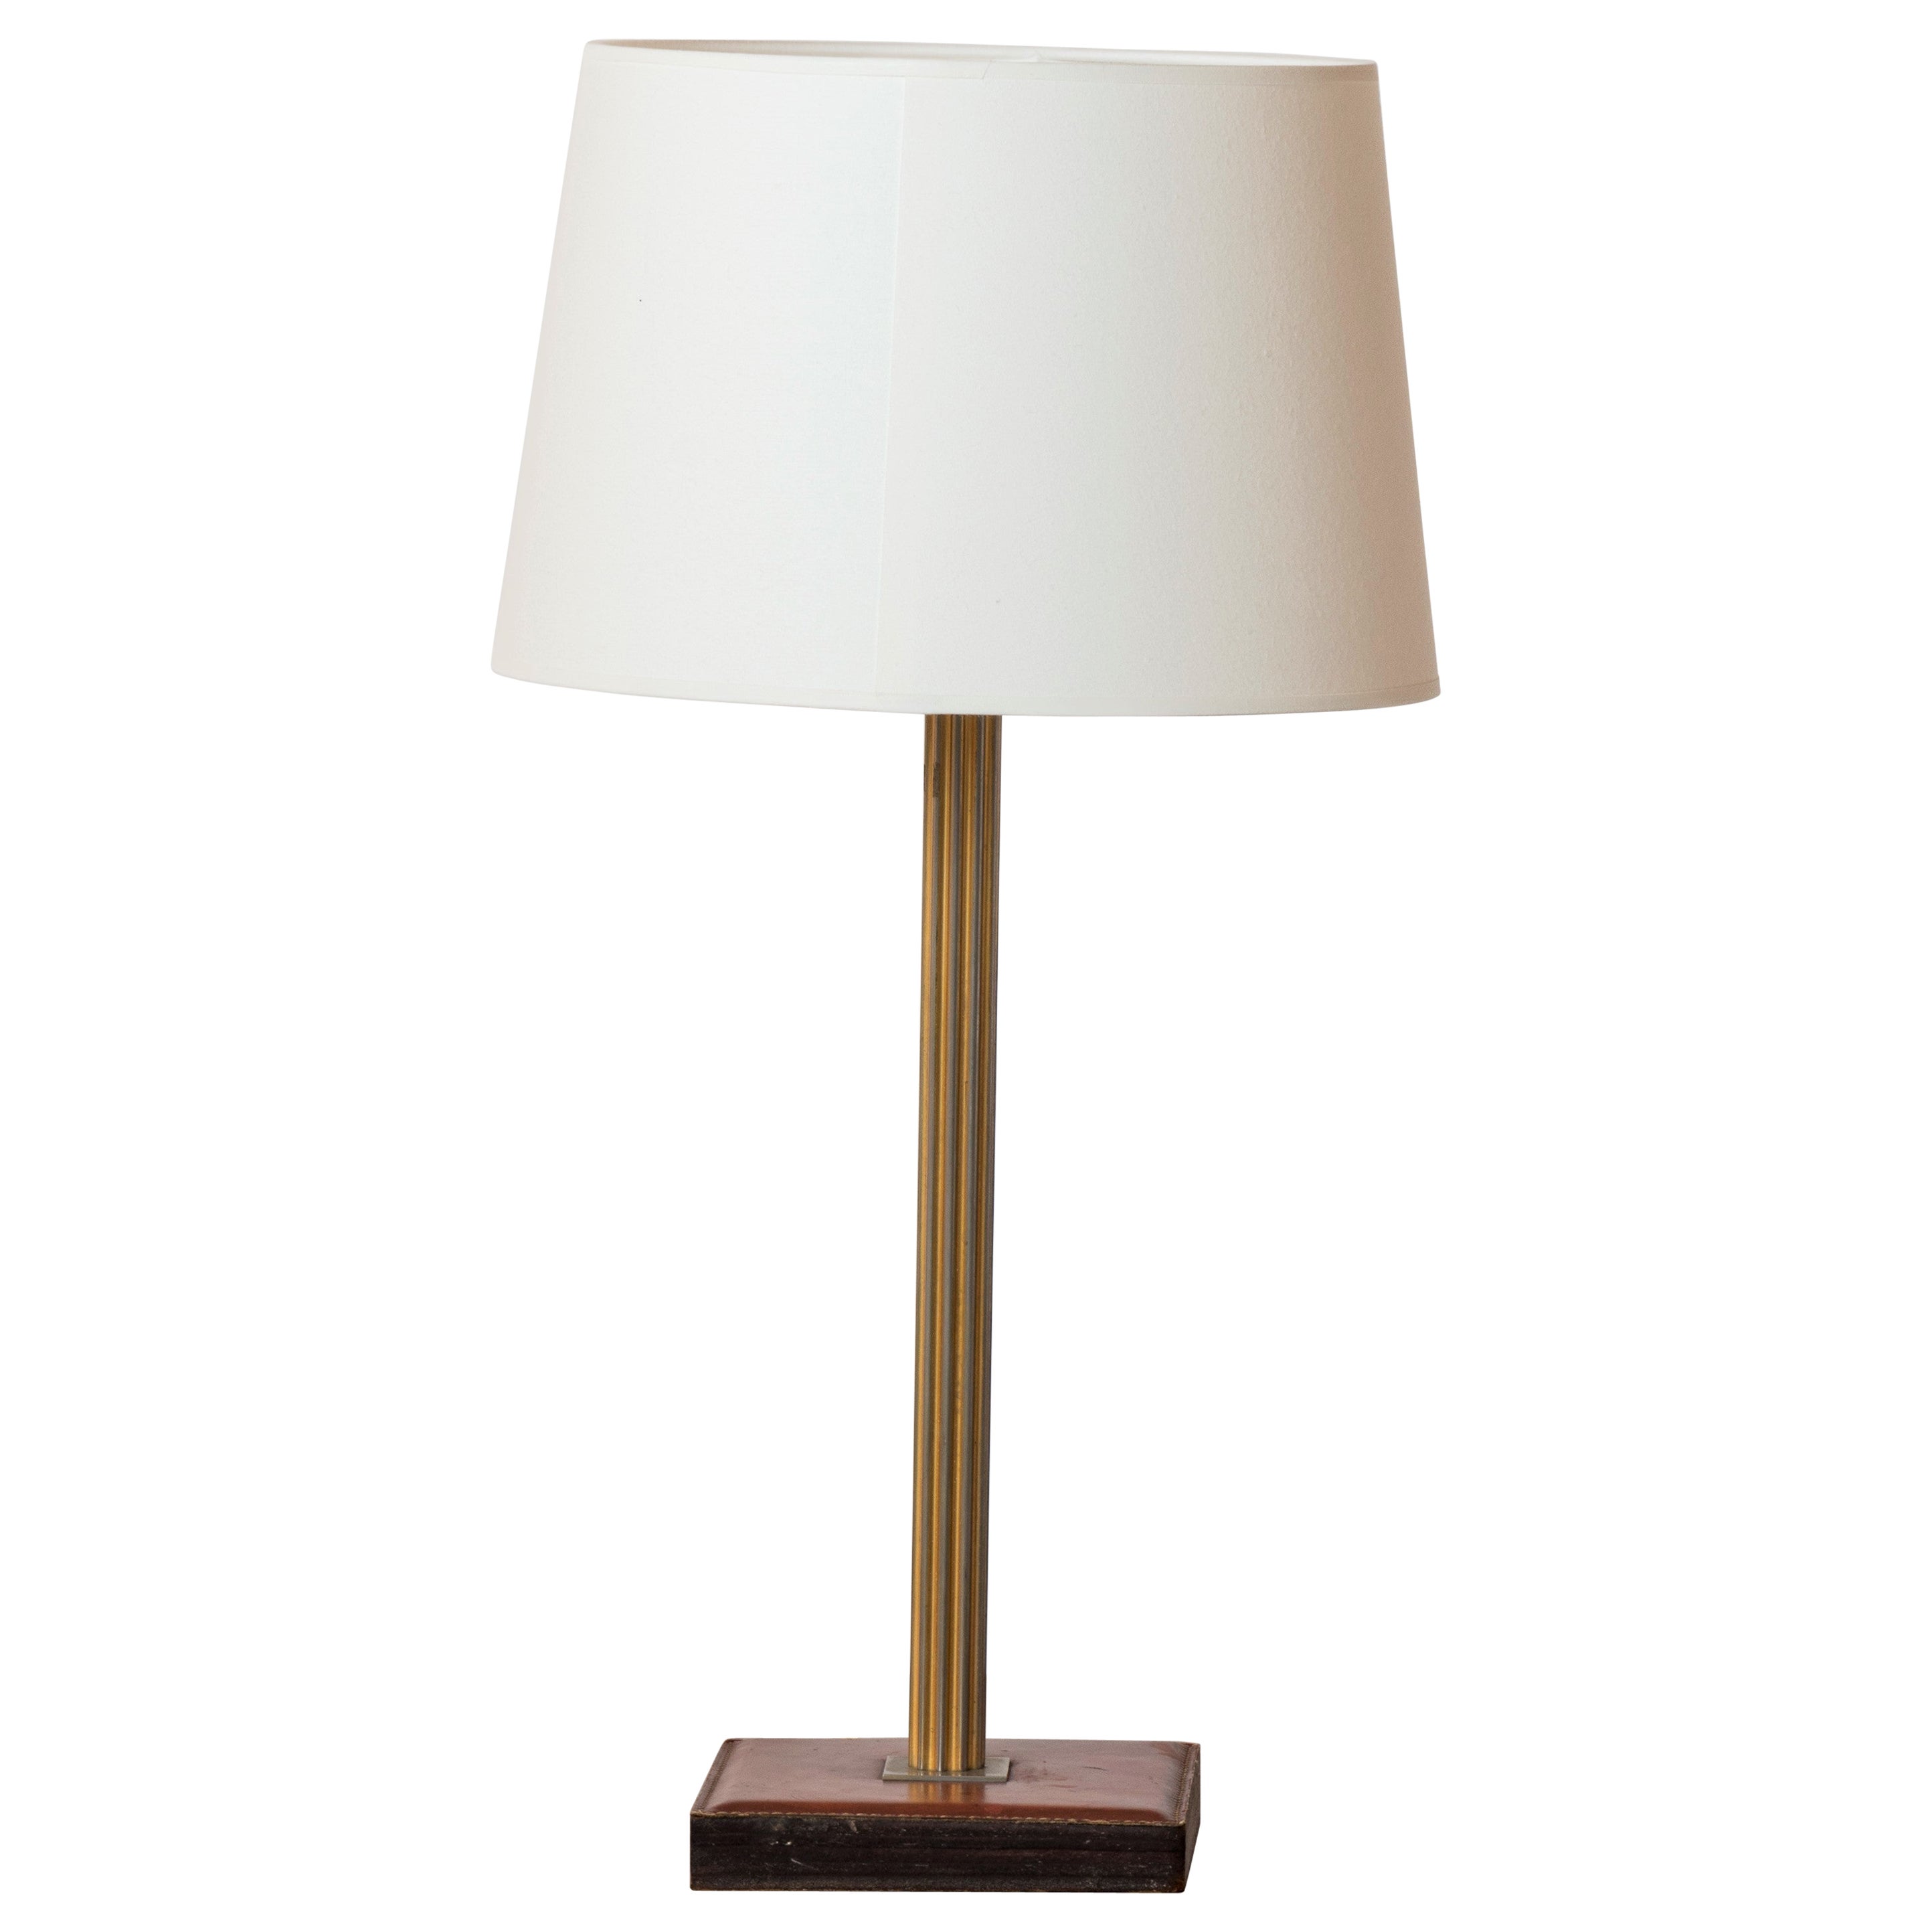 Cognac Leather Base and Brass Table Lamp by Delvaux, Belgium 1960s For Sale